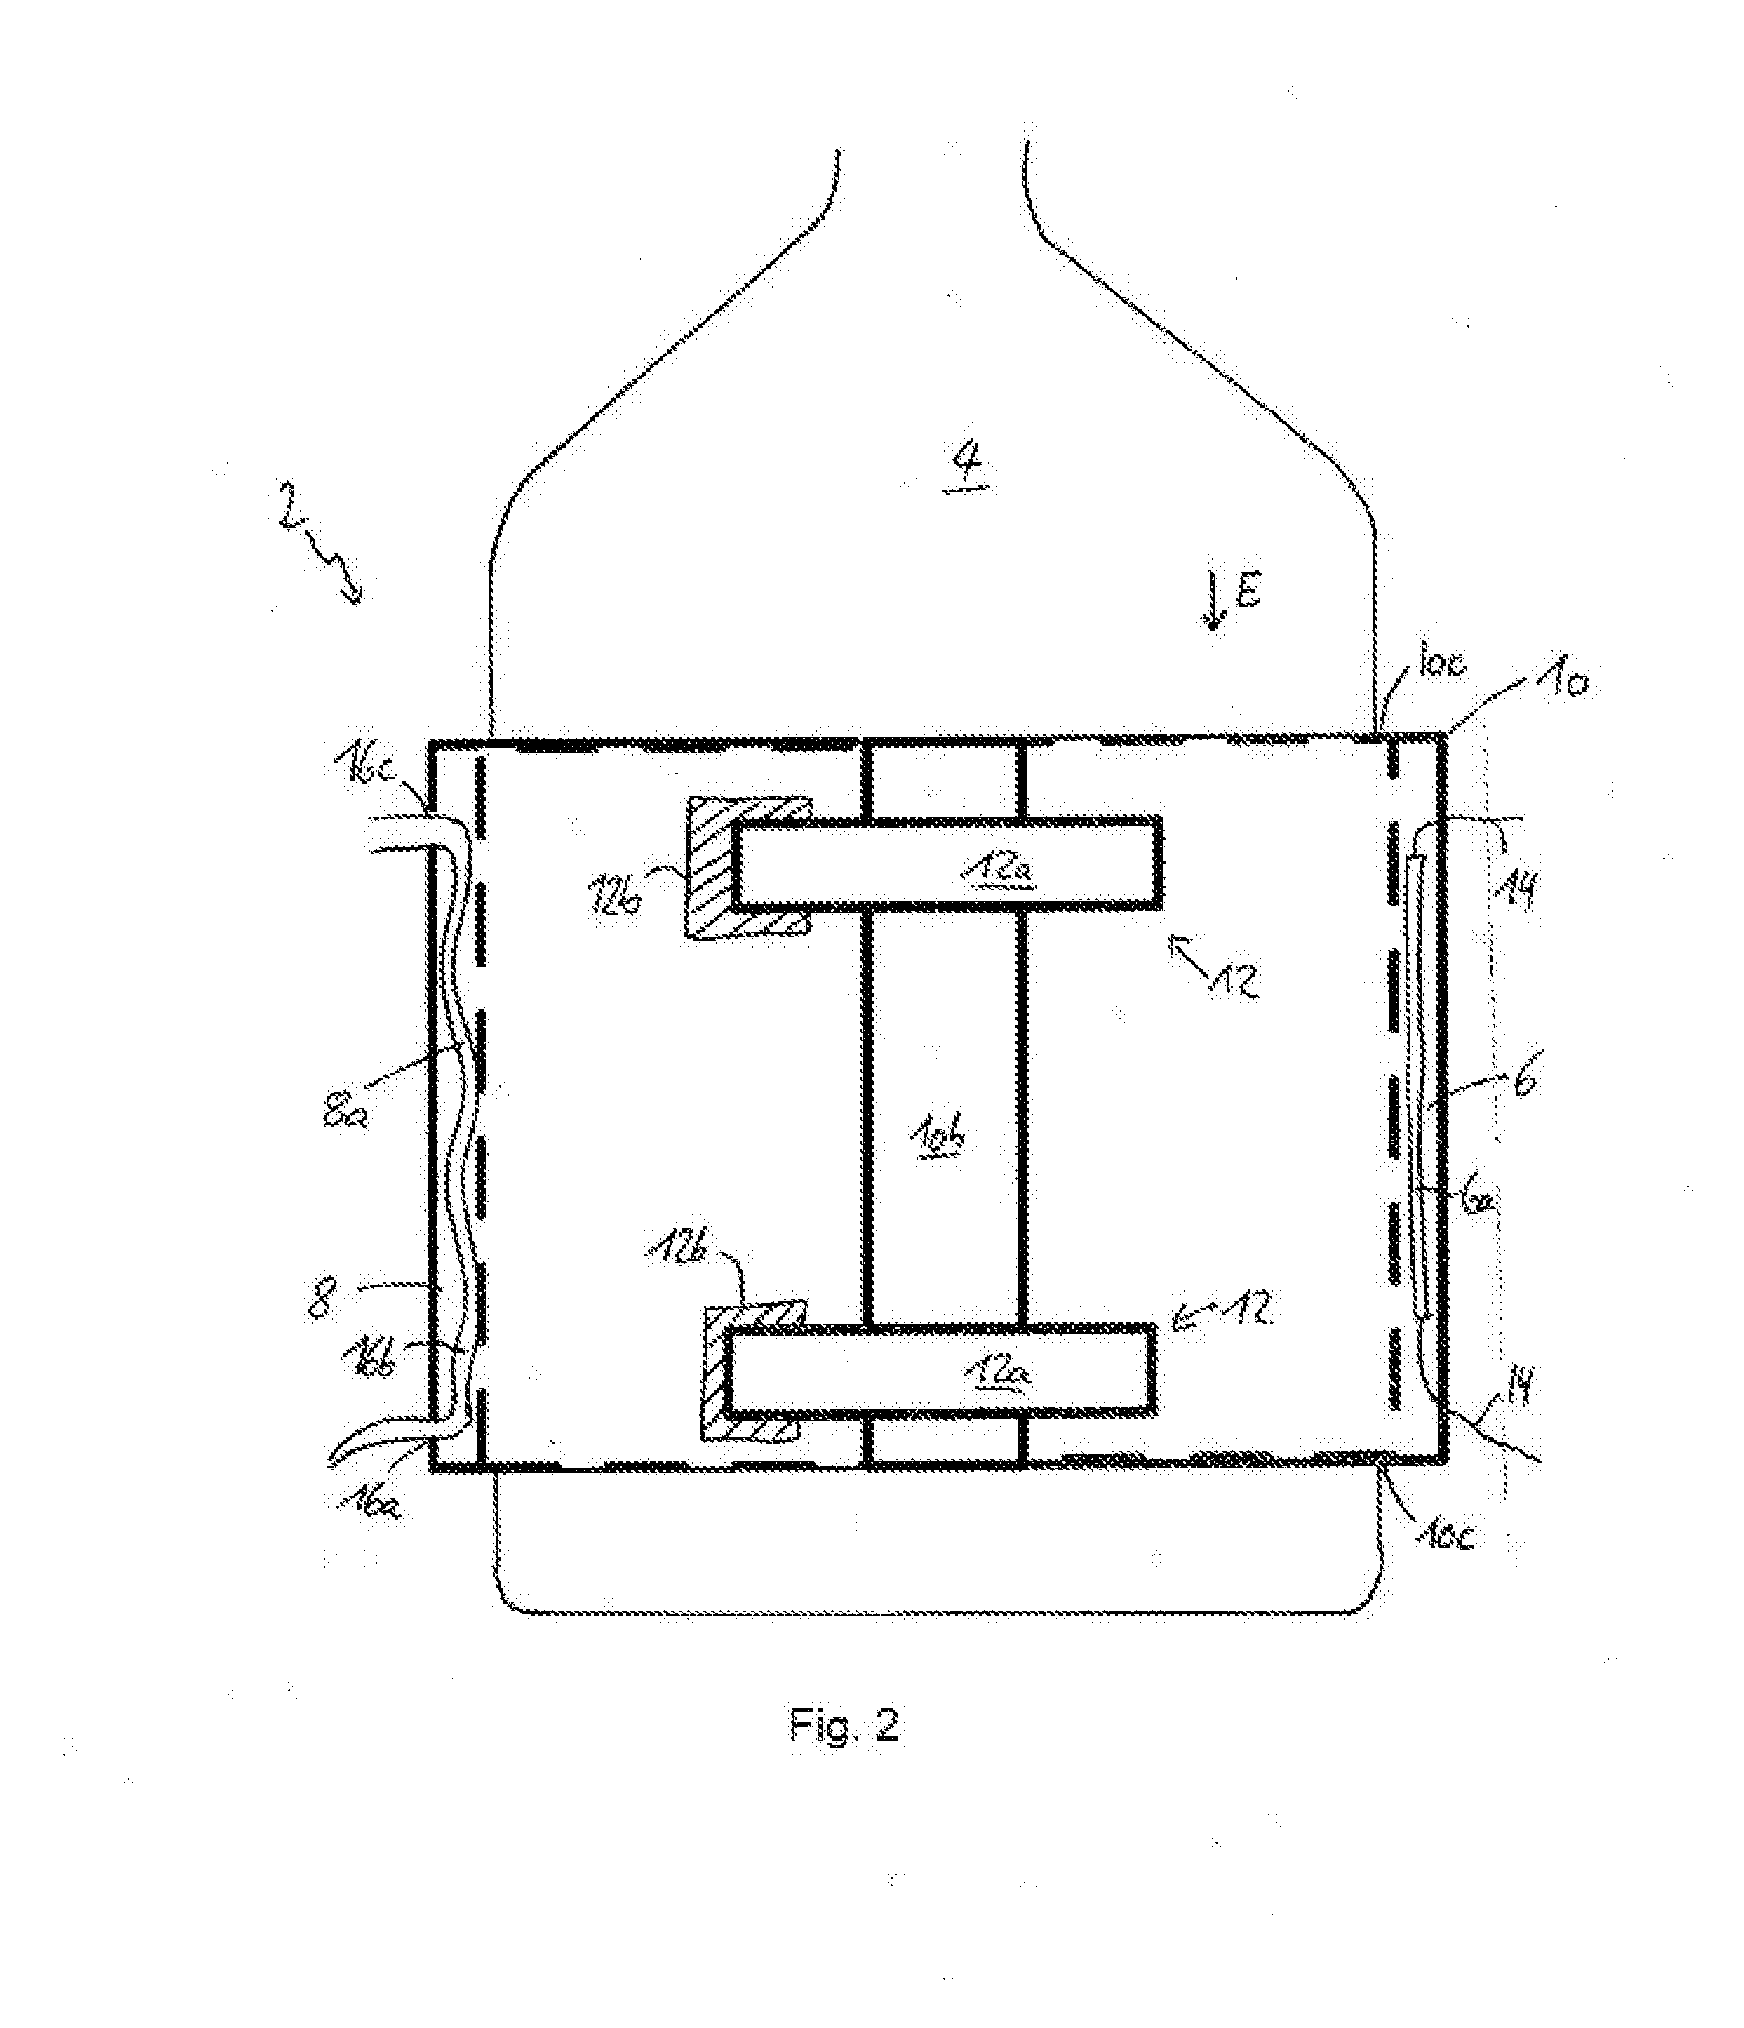 Temperature control device, use and arrangement